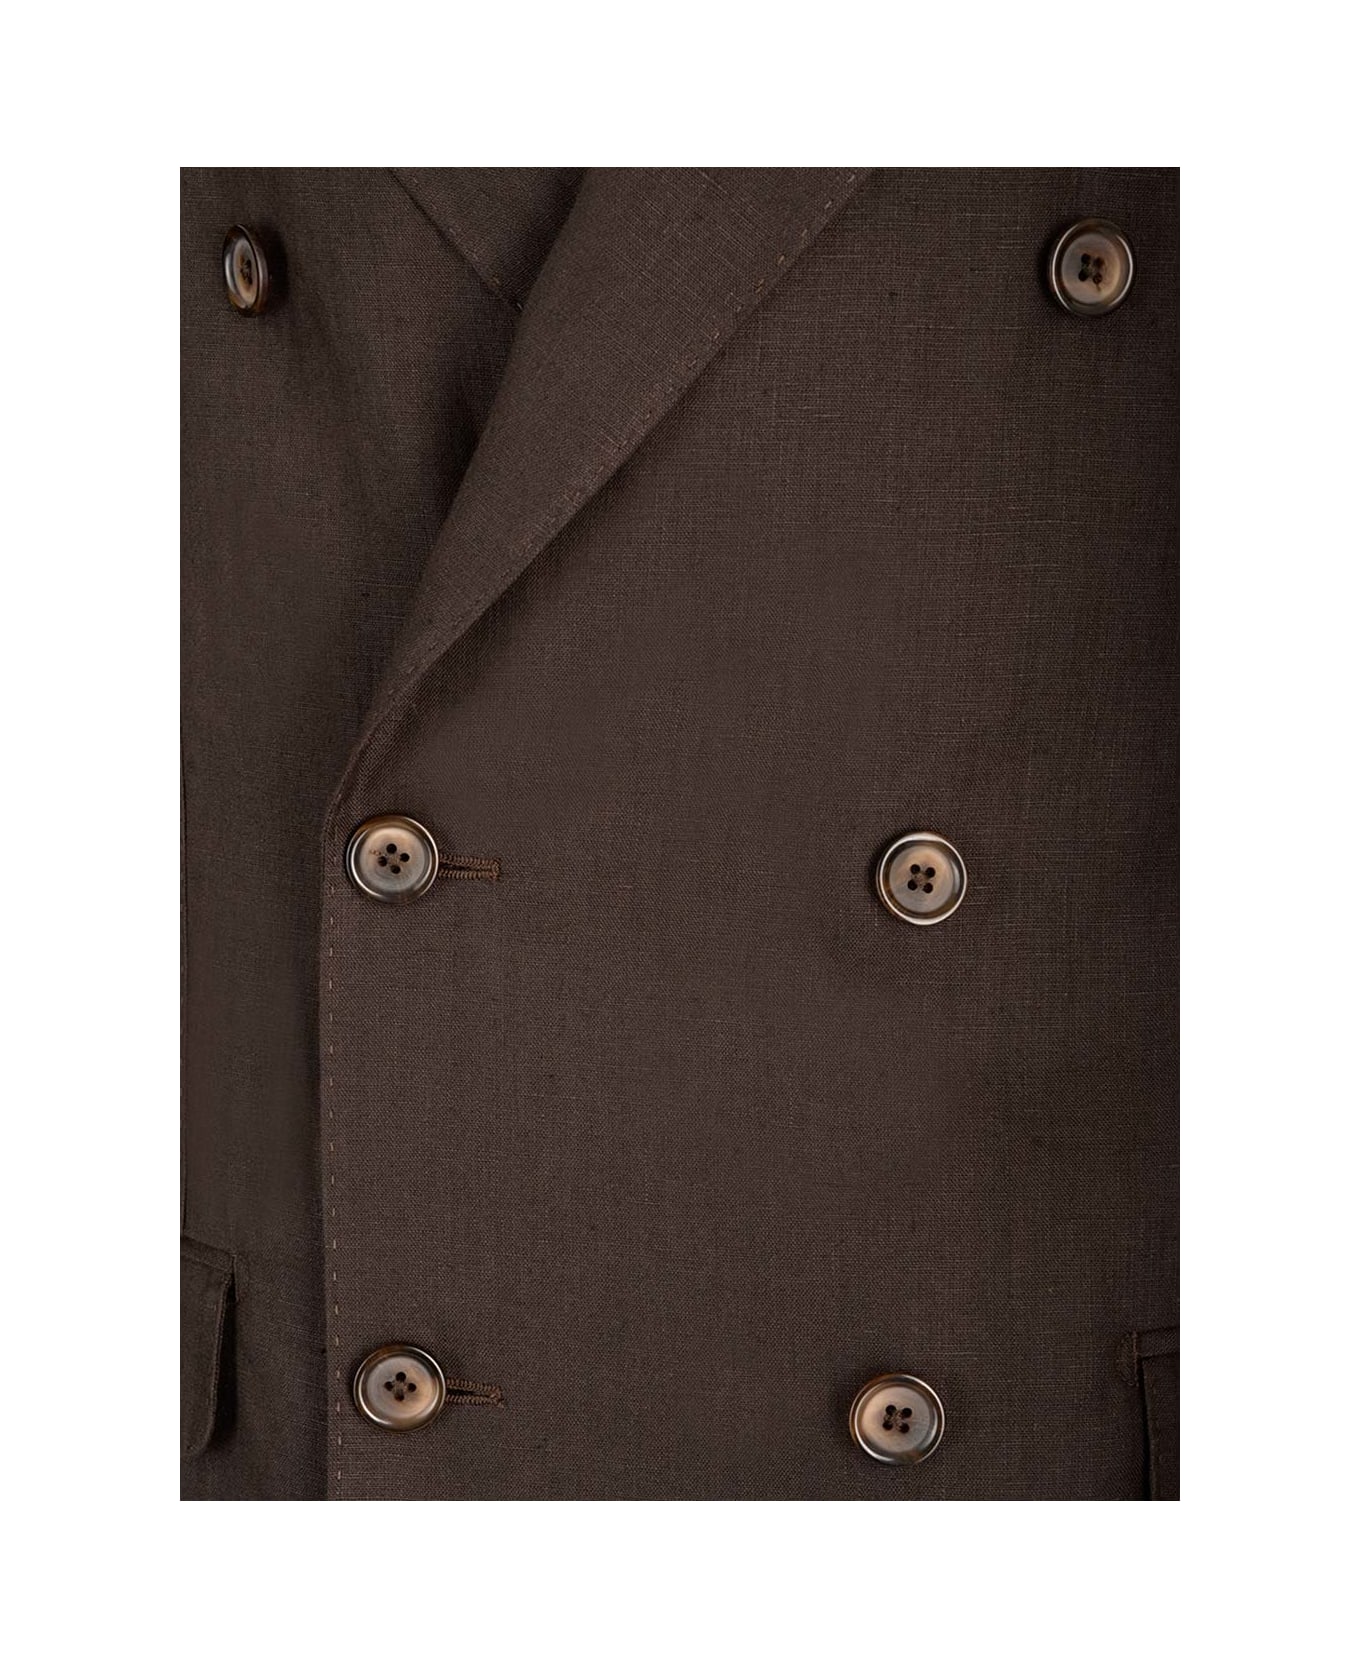 Dolce & Gabbana Double-breasted Jacket - Brown